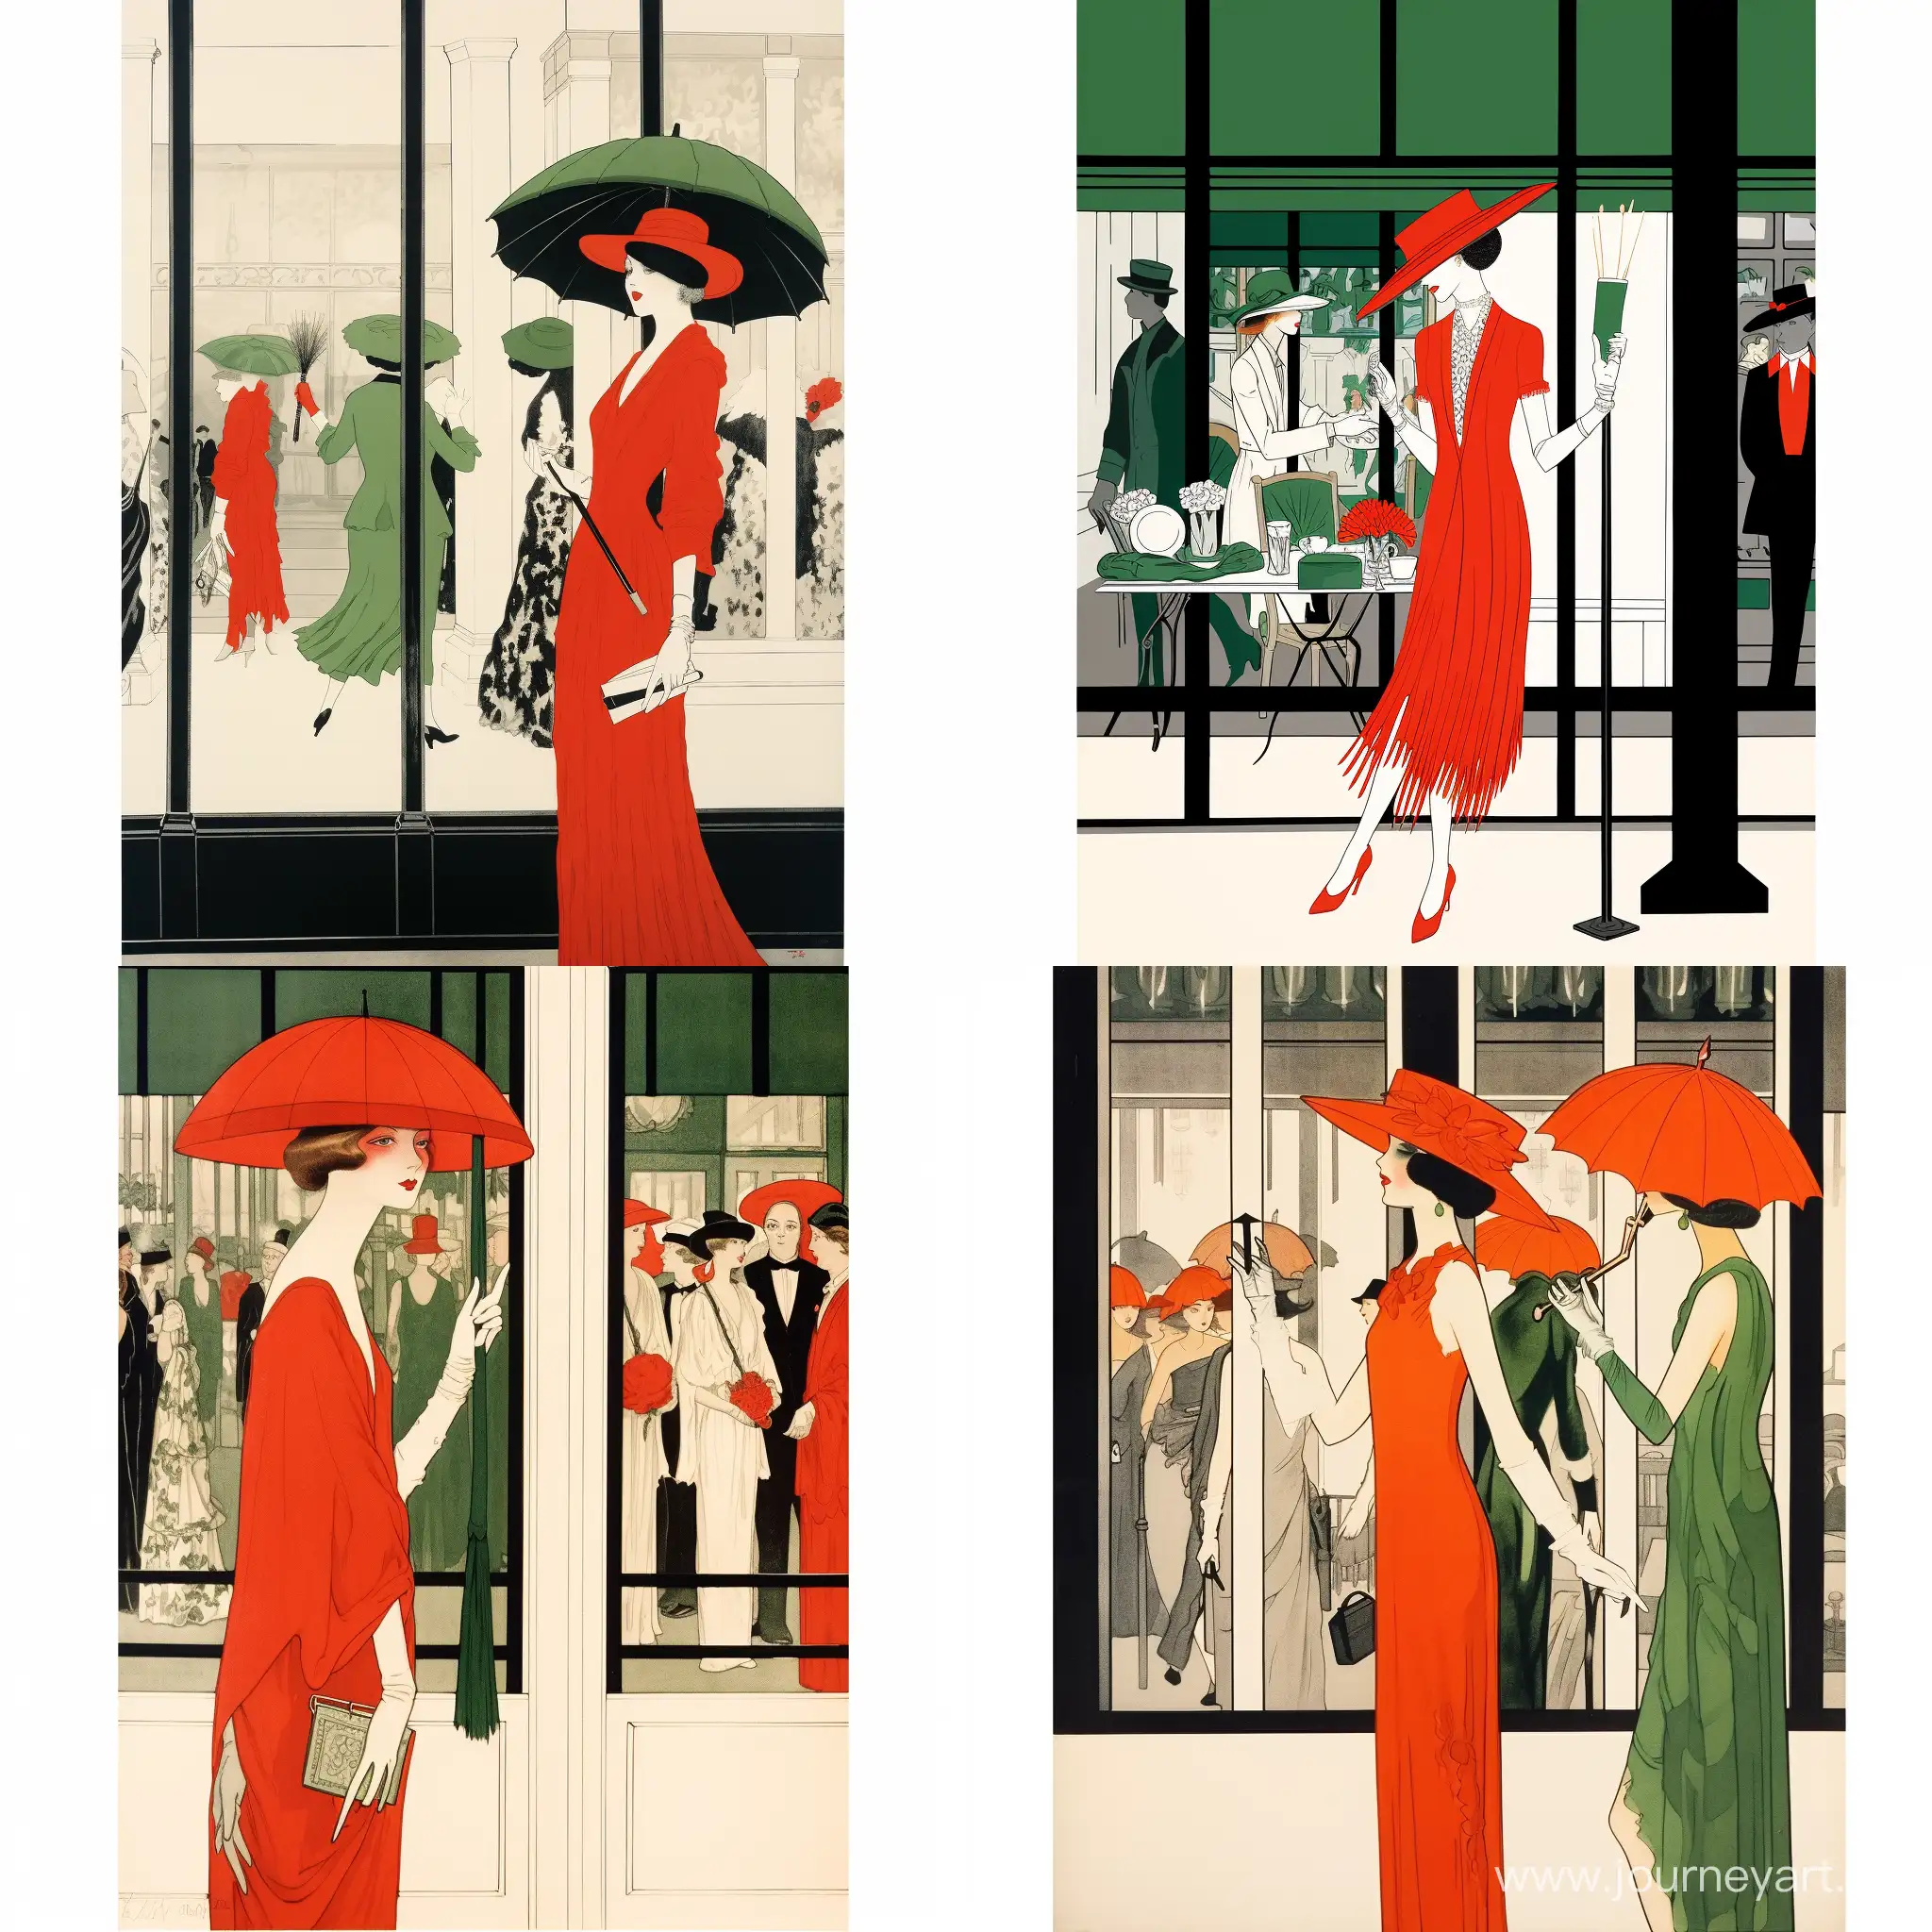 Only one human woman without a face in a red dress with long sleeves and white cuffs from the 1914s holding a yellow parasol is on the left side of the image looking at a white building shop on the right side of the image which contains a glass wall and behind the glass wall there are three black hats with green feathers and one black hat with a red feather and one brown hat with a black feather and one yellow hat with a black feather. It all looks like a painting.